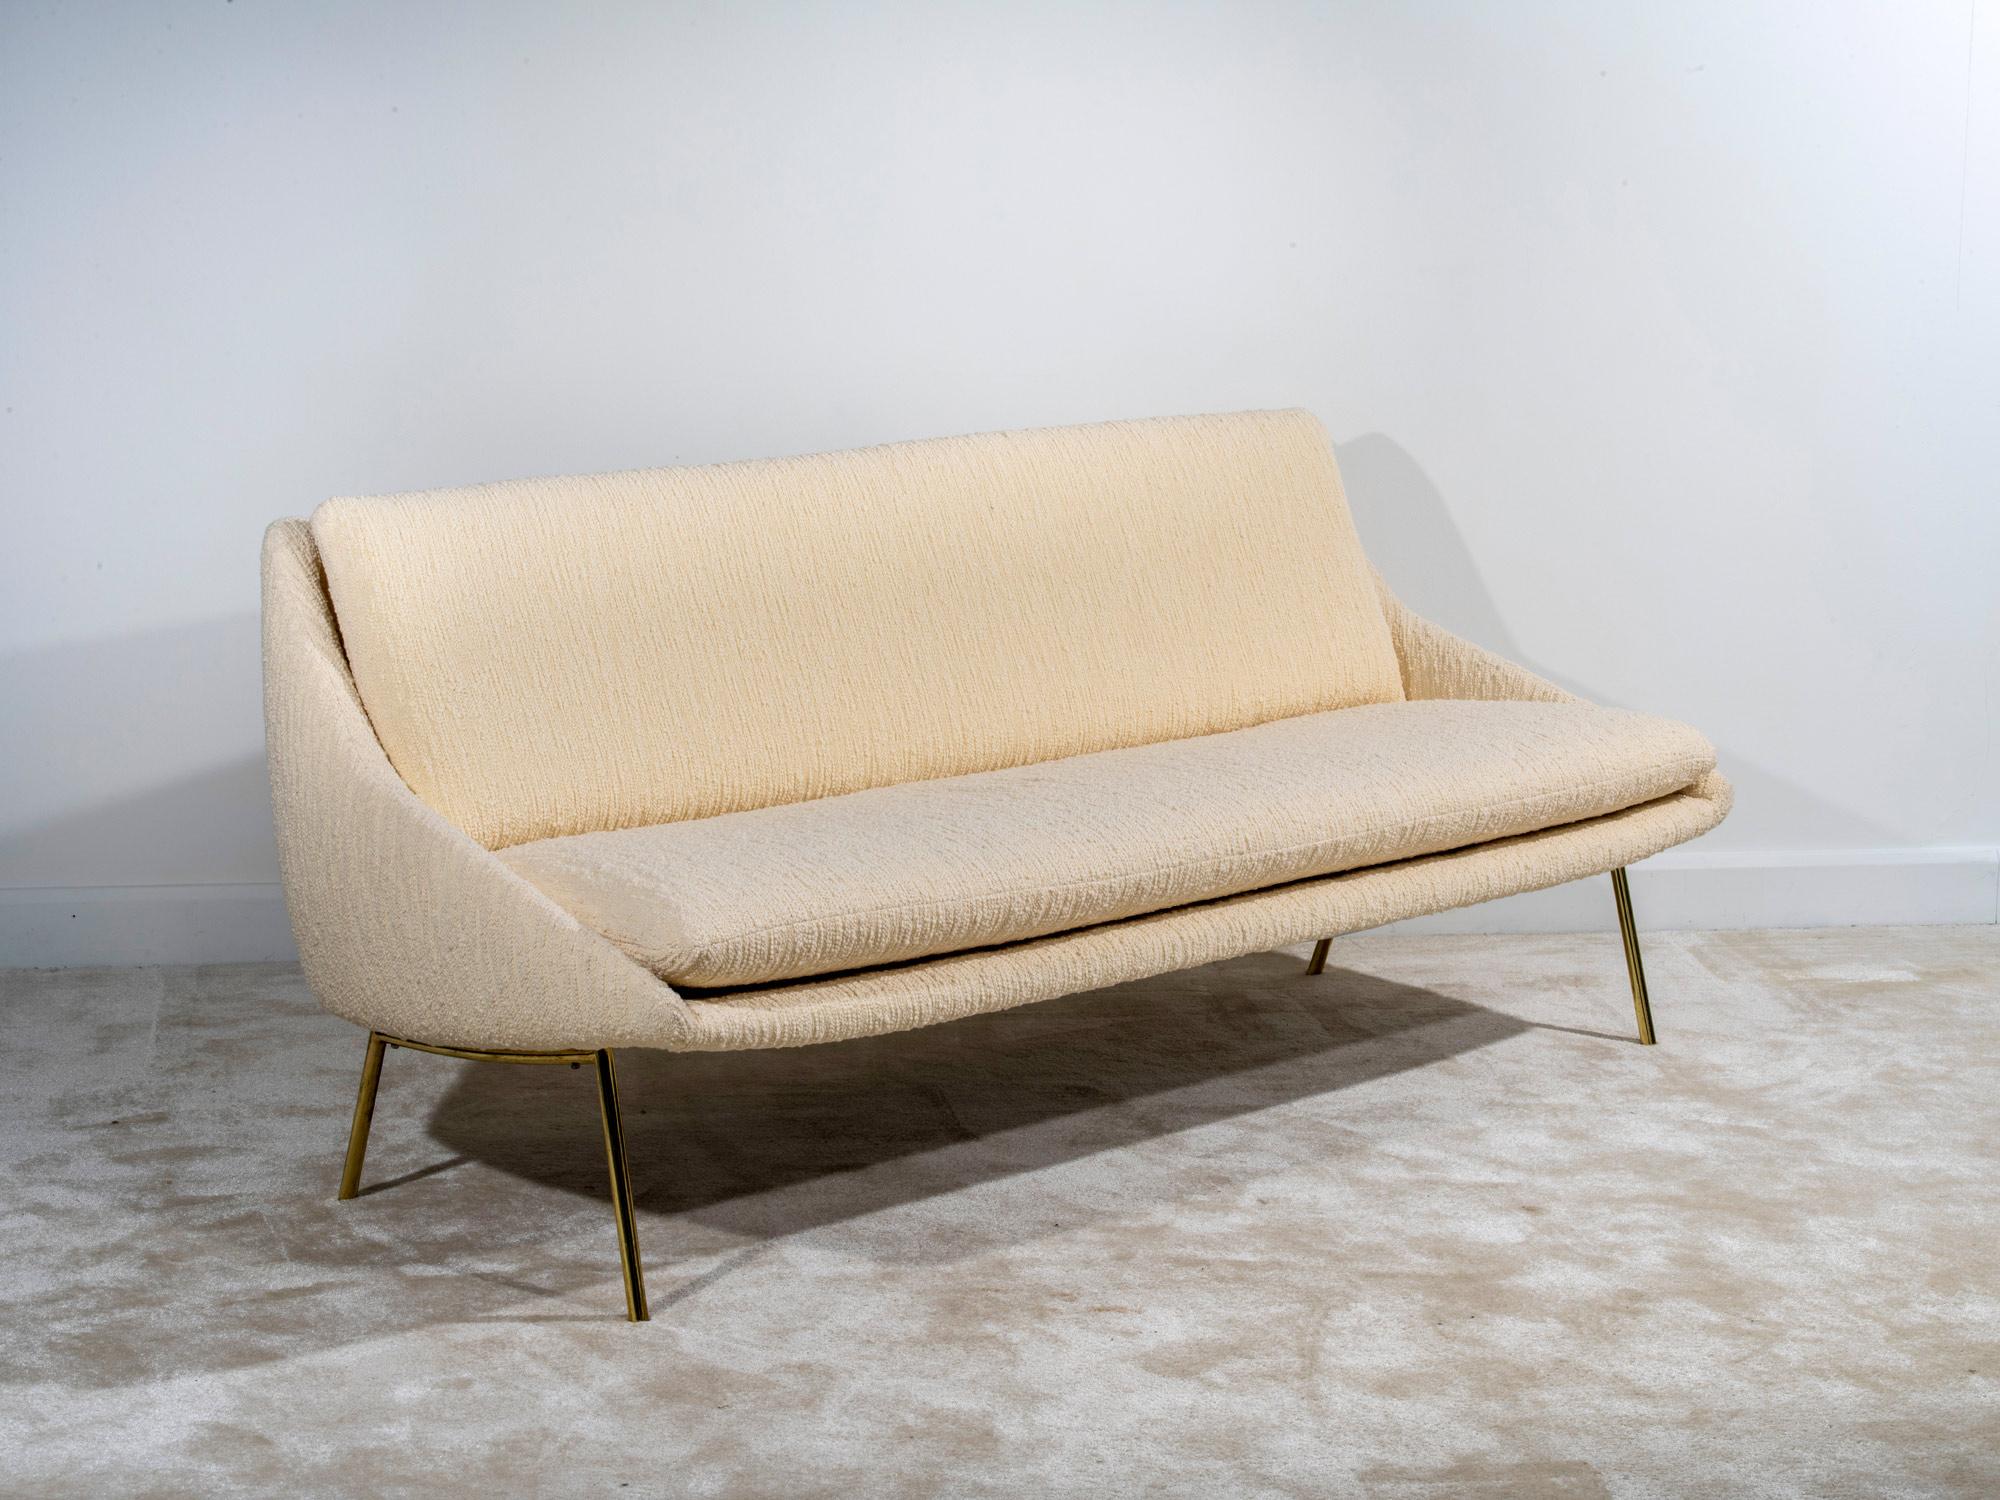 1950s  Sofa  with polished brass feets by Joseph Andre Motte.
Model 800
Produced By Steiner in 1950S , France.
New upholstered Bisson Brunel Fabric.
Perfect condition.
